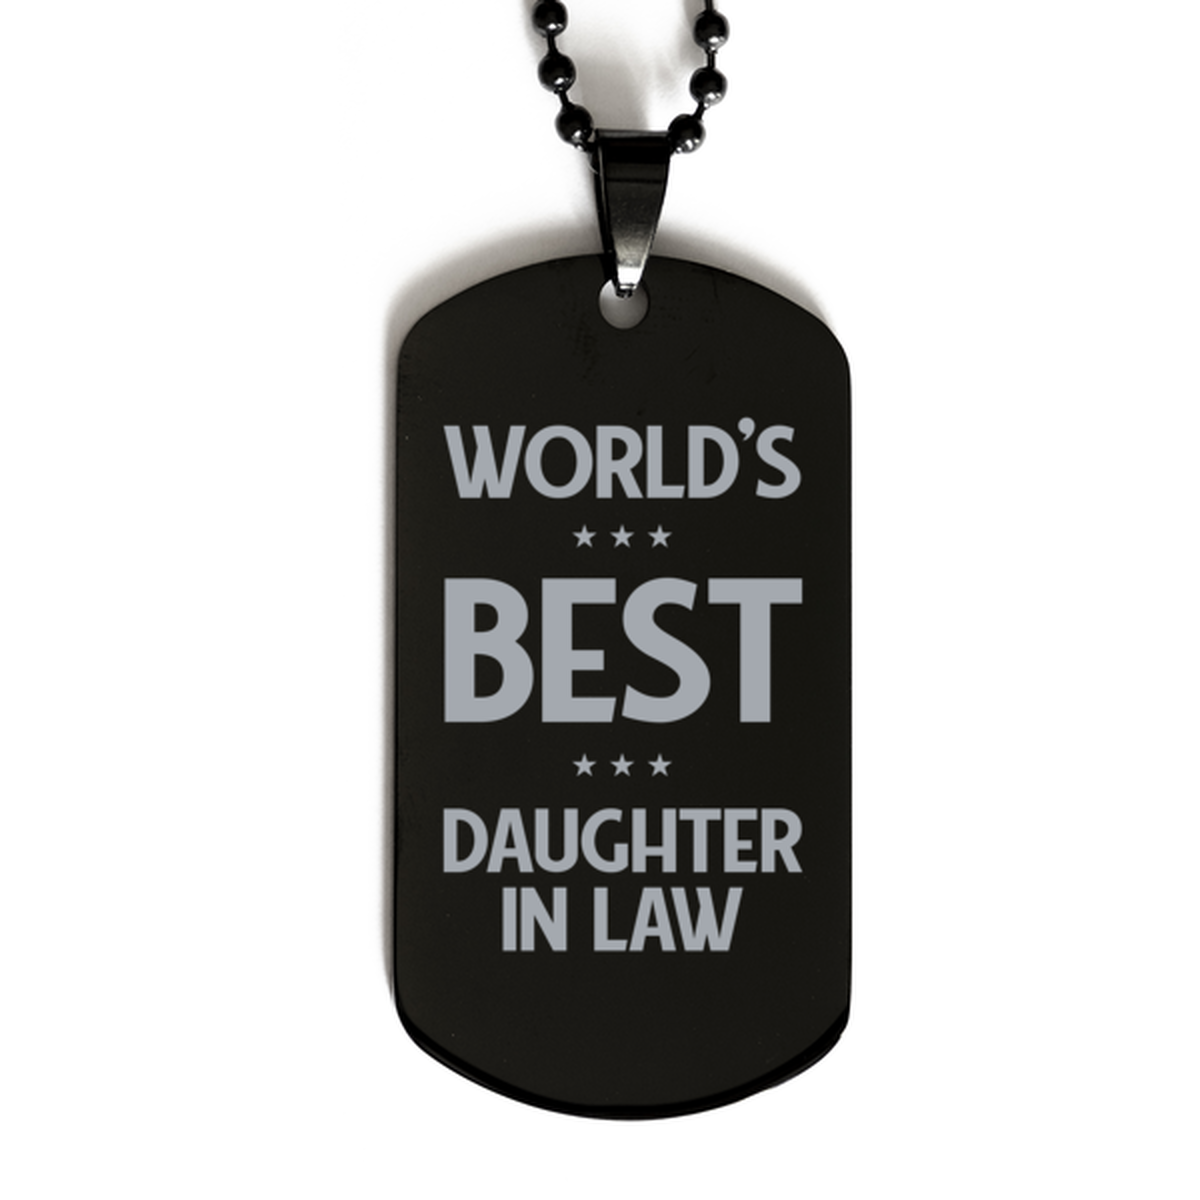 Worlds Best Daughter in law Gifts, Funny Black Engraved Dog Tag For Daughter in law, Birthday Presents For Women